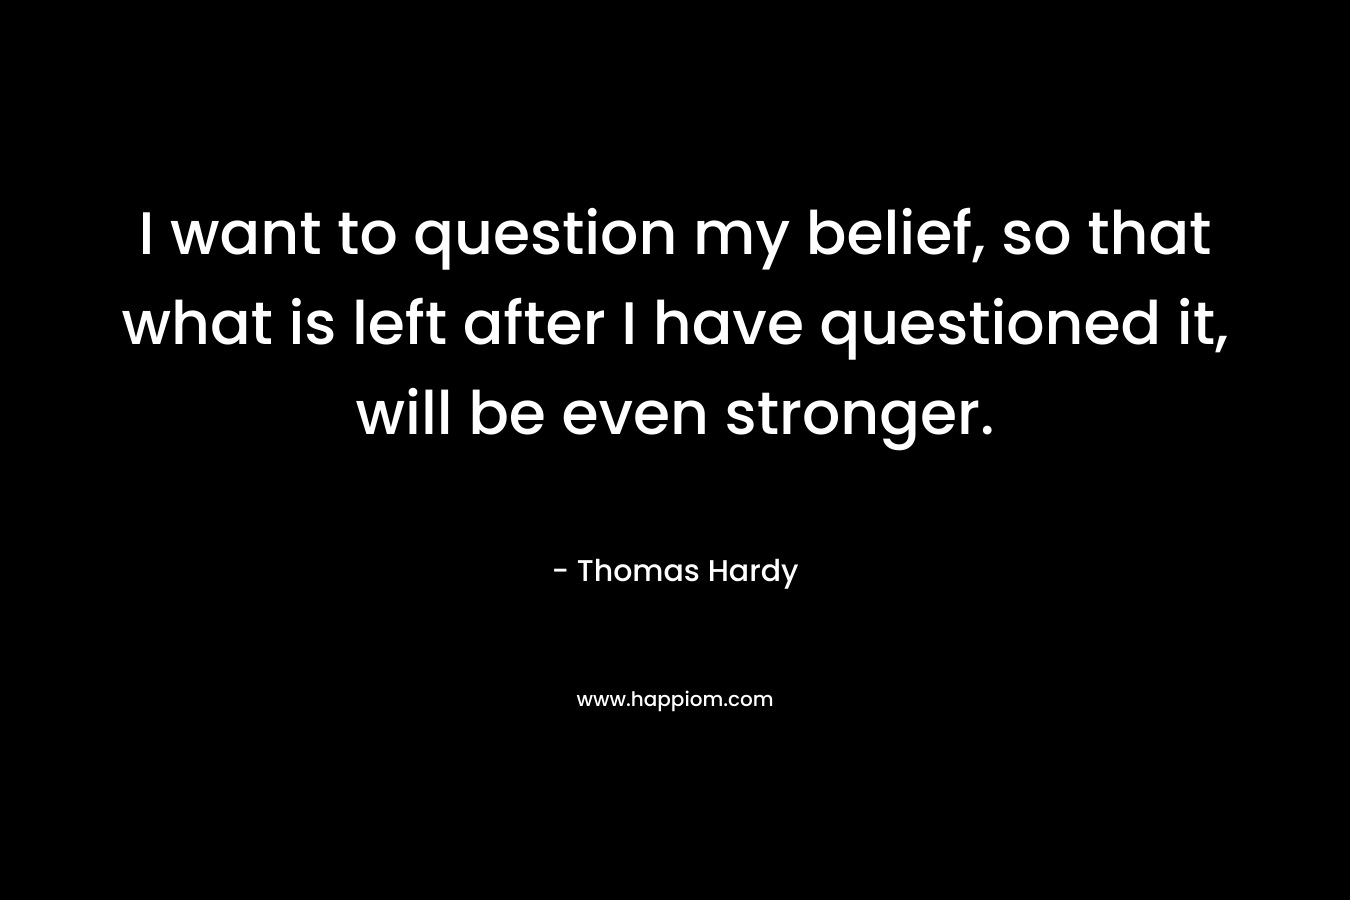 I want to question my belief, so that what is left after I have questioned it, will be even stronger.